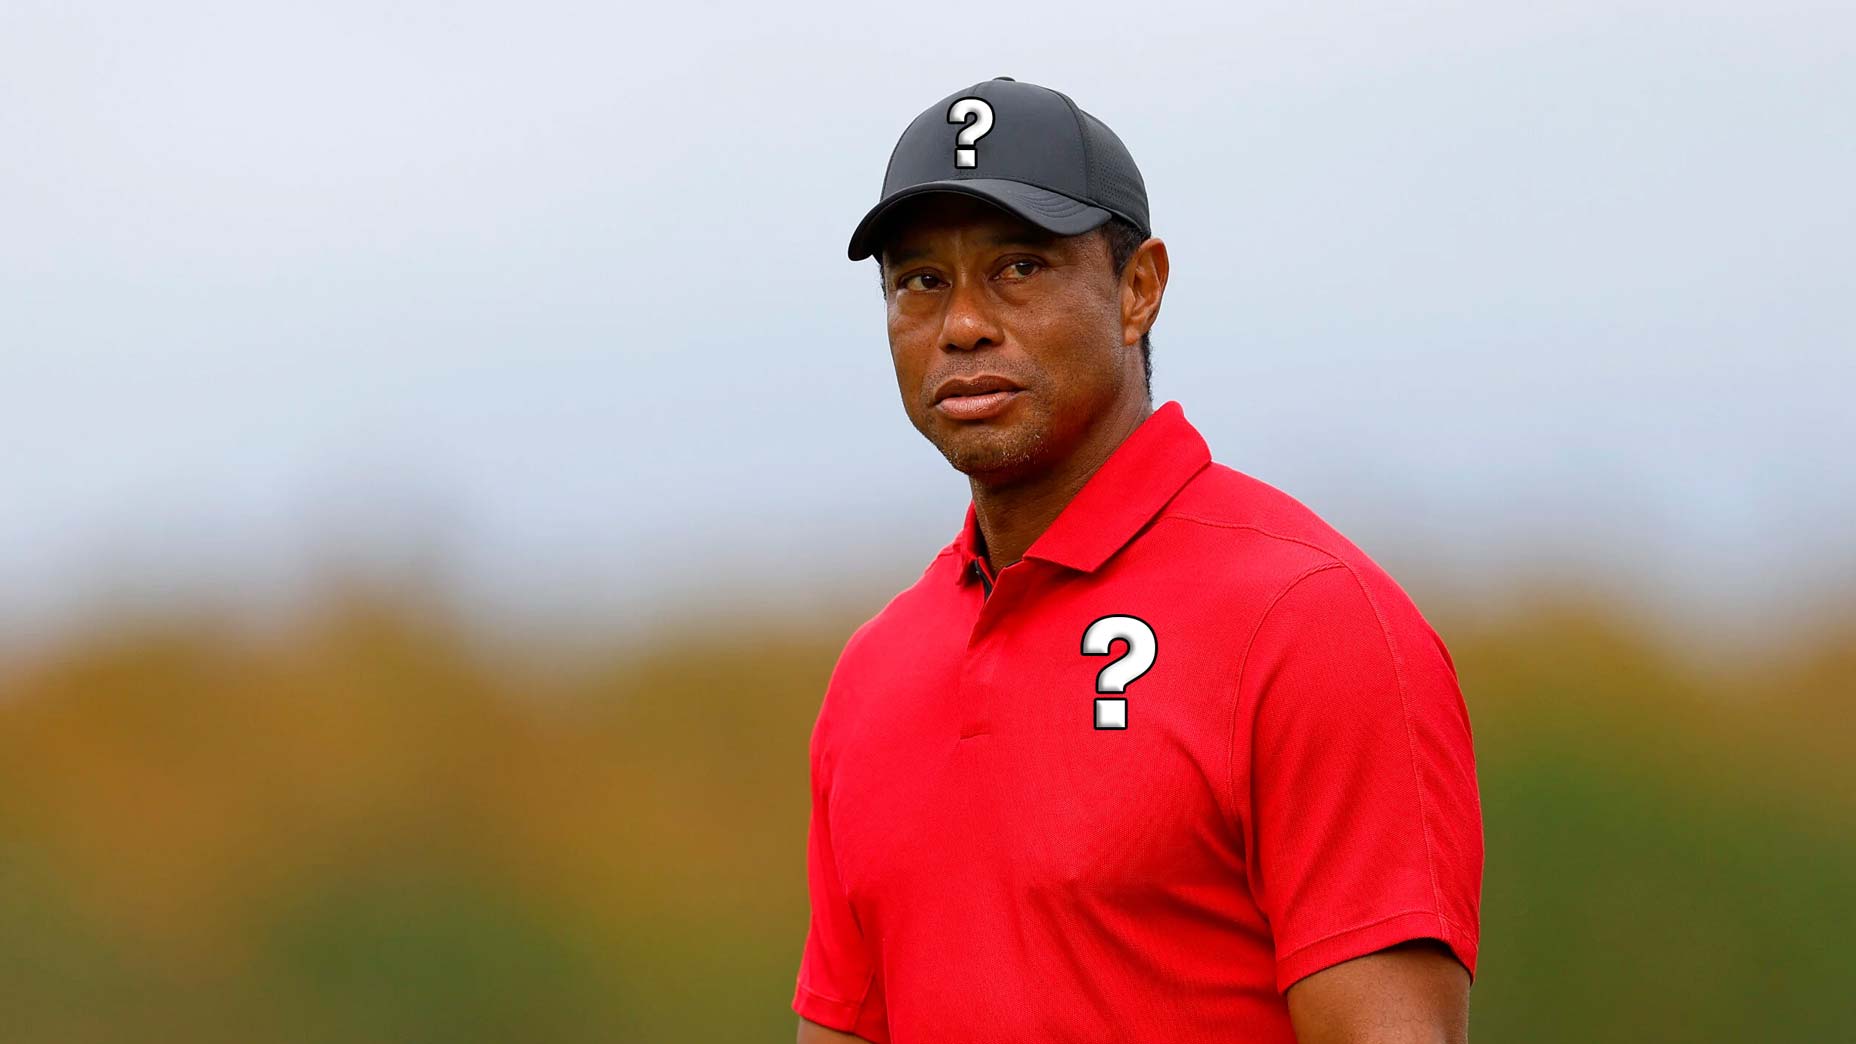 Tiger Woods may soon have a new apparel deal